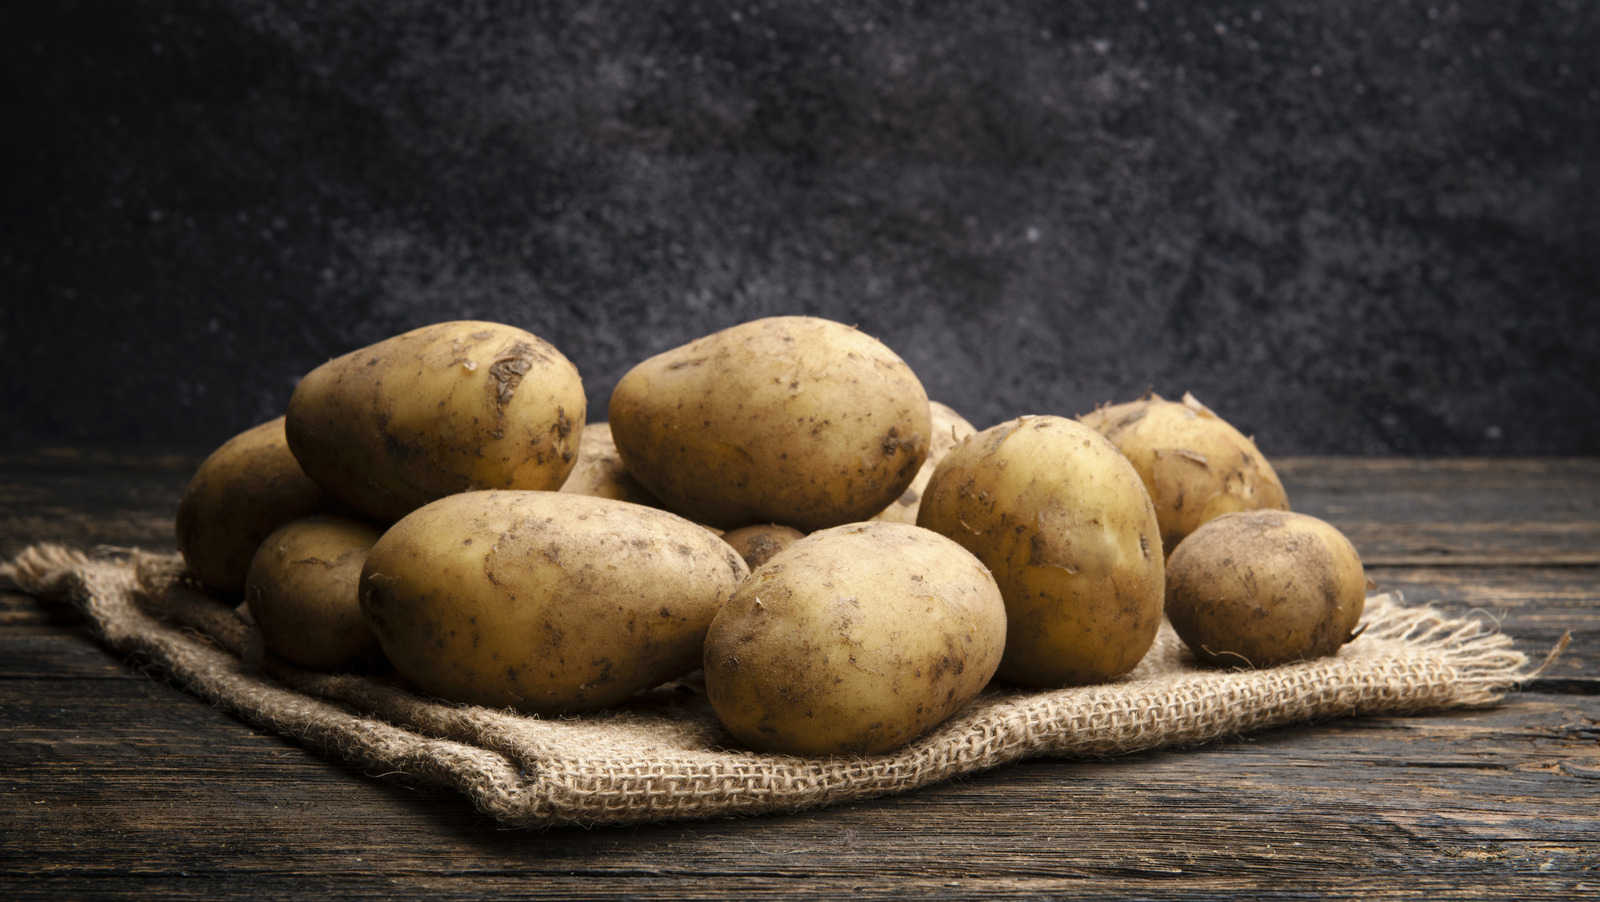 Carrying too many potatoes in your car was illegal in Australia as recently  as 2021 - Drive